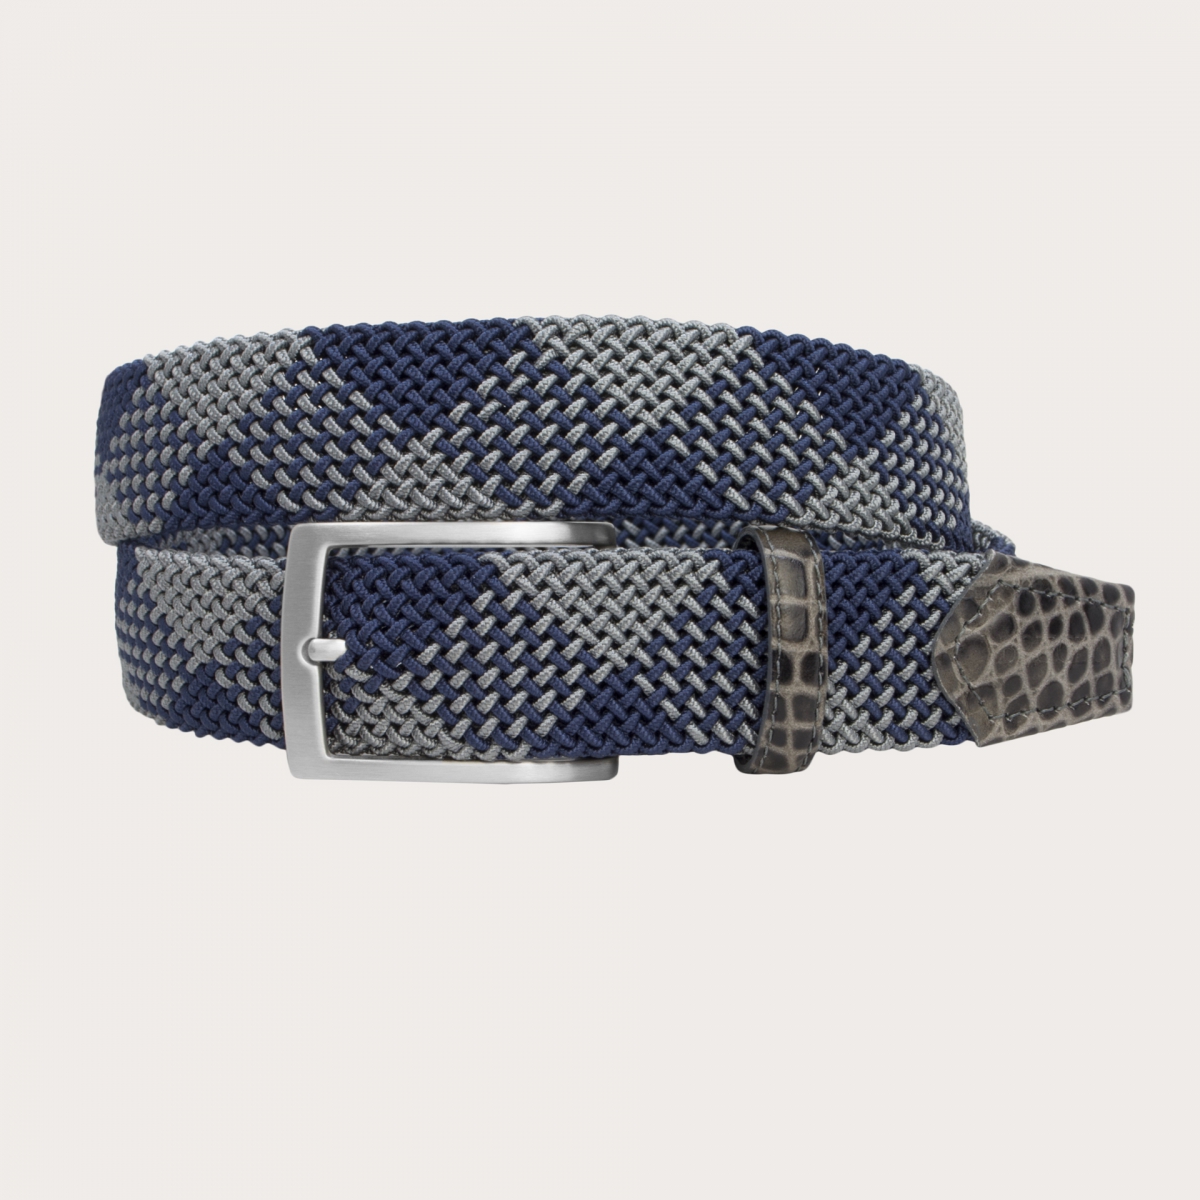 BRUCLE Elastic woven nickel free belt with grey and blue pattern